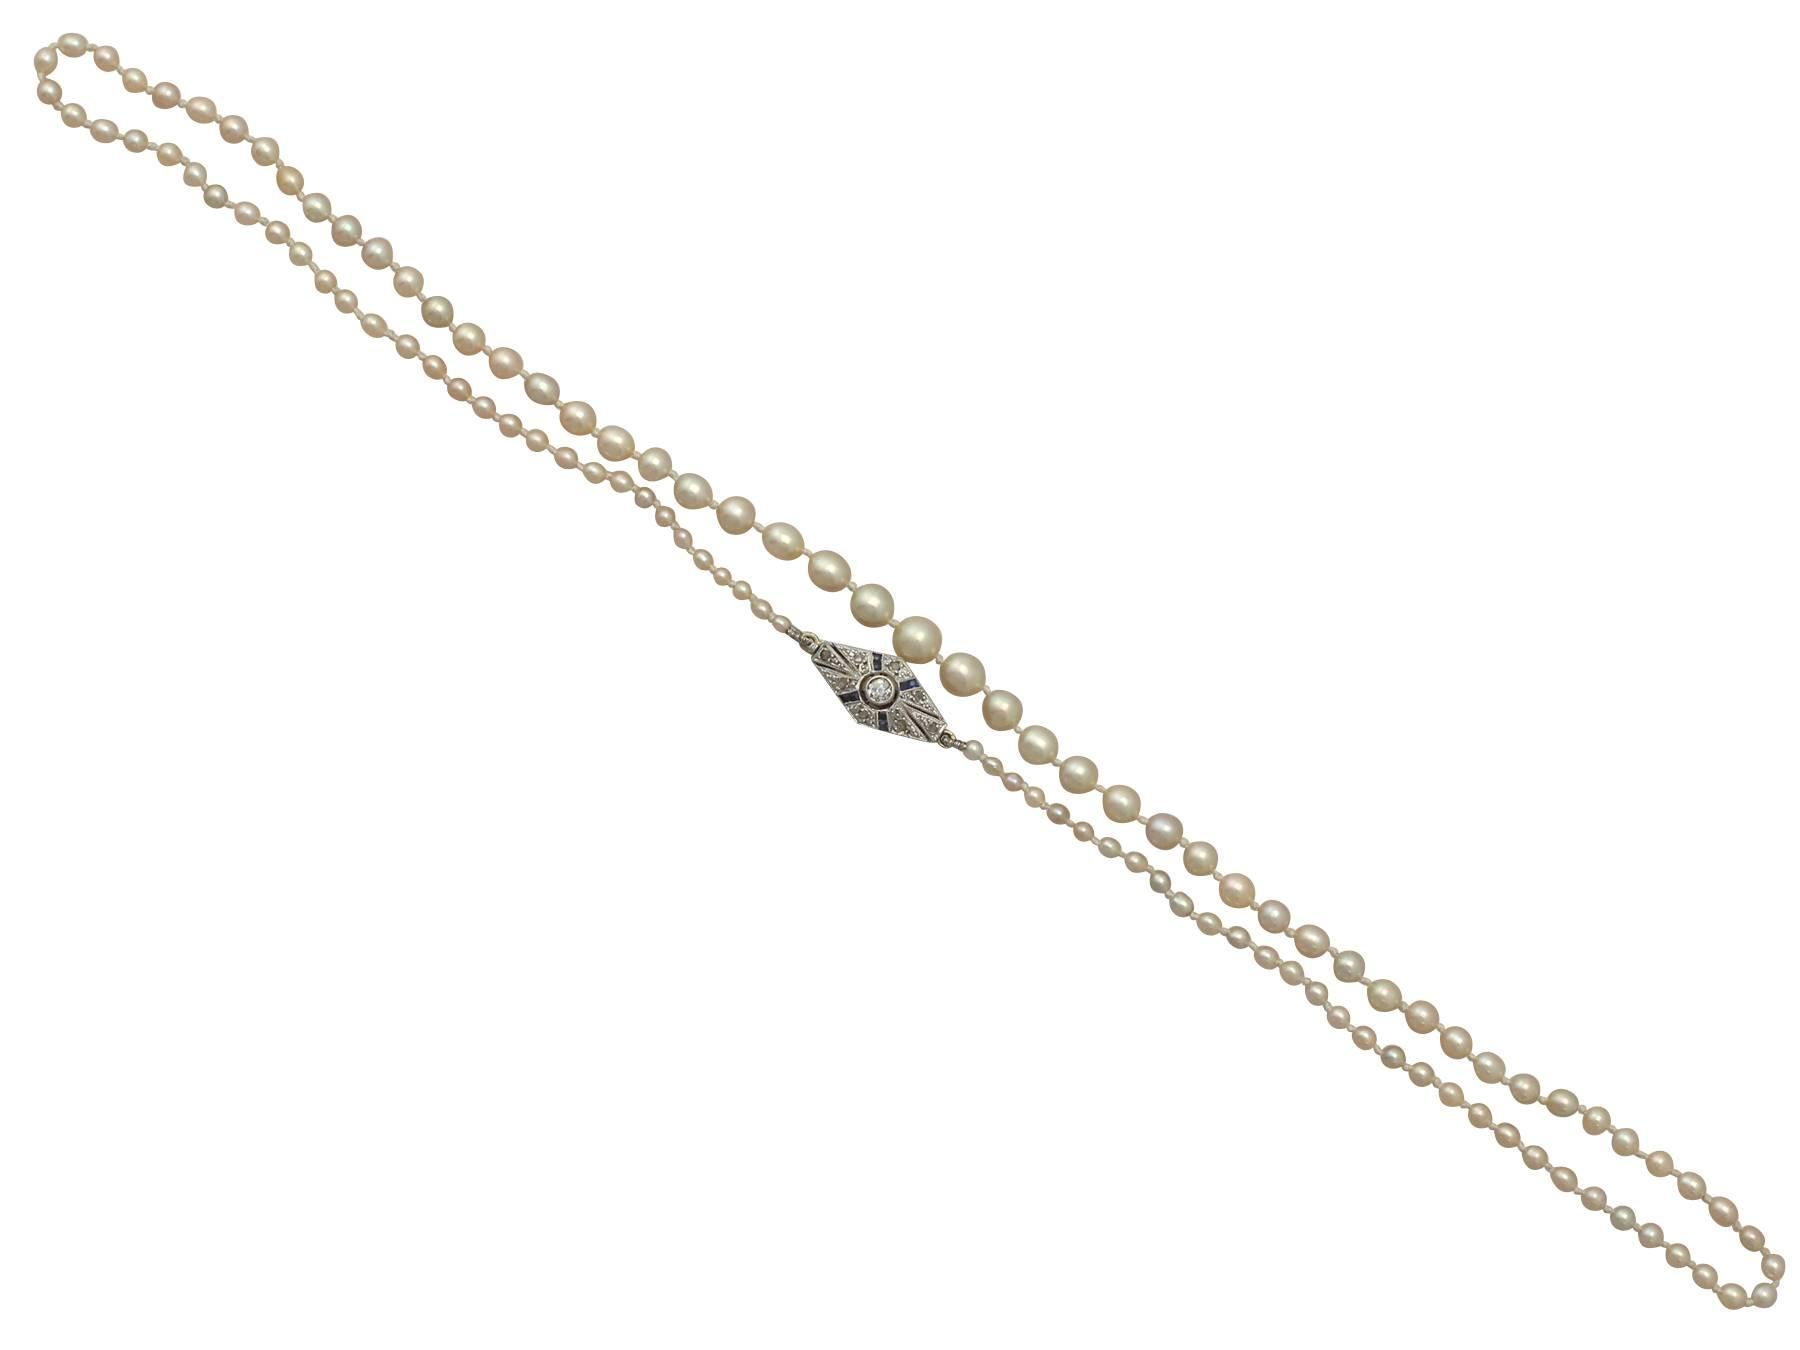 This fine and impressive antique pearl necklace with diamond clasp has been crafted in 18 ct yellow gold with an 18 ct white gold setting.

This impressive single strand pearl necklace consists of one hundred and eleven individually knotted natural